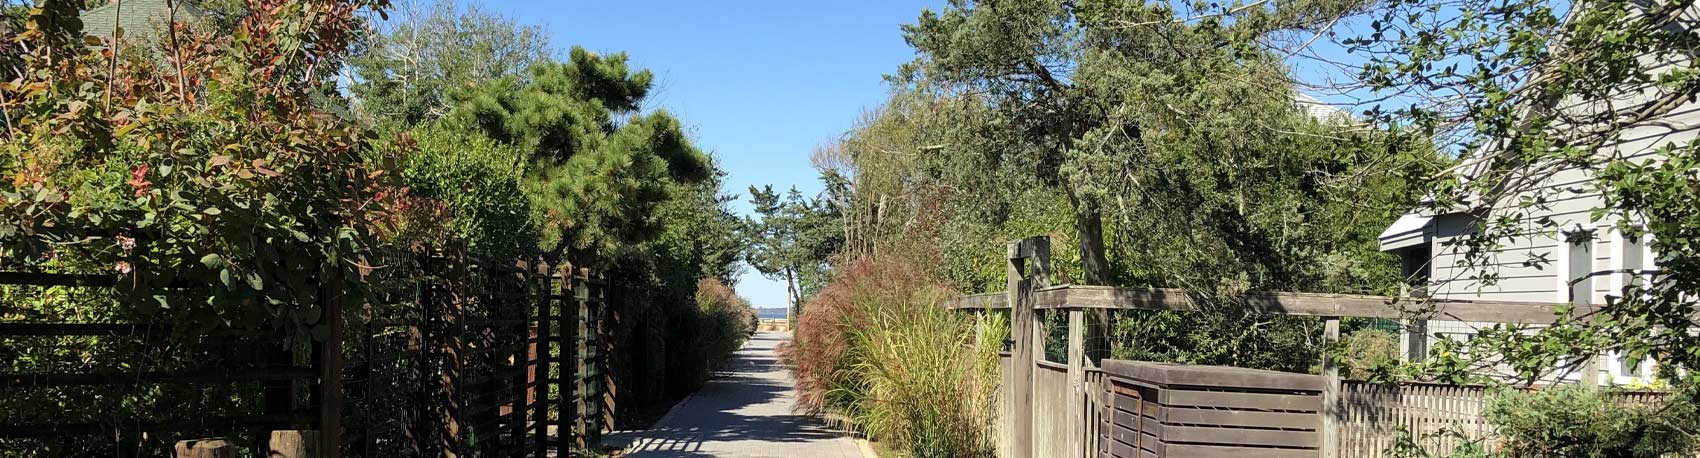 View-of-the-Bay-through-Homes Fire island